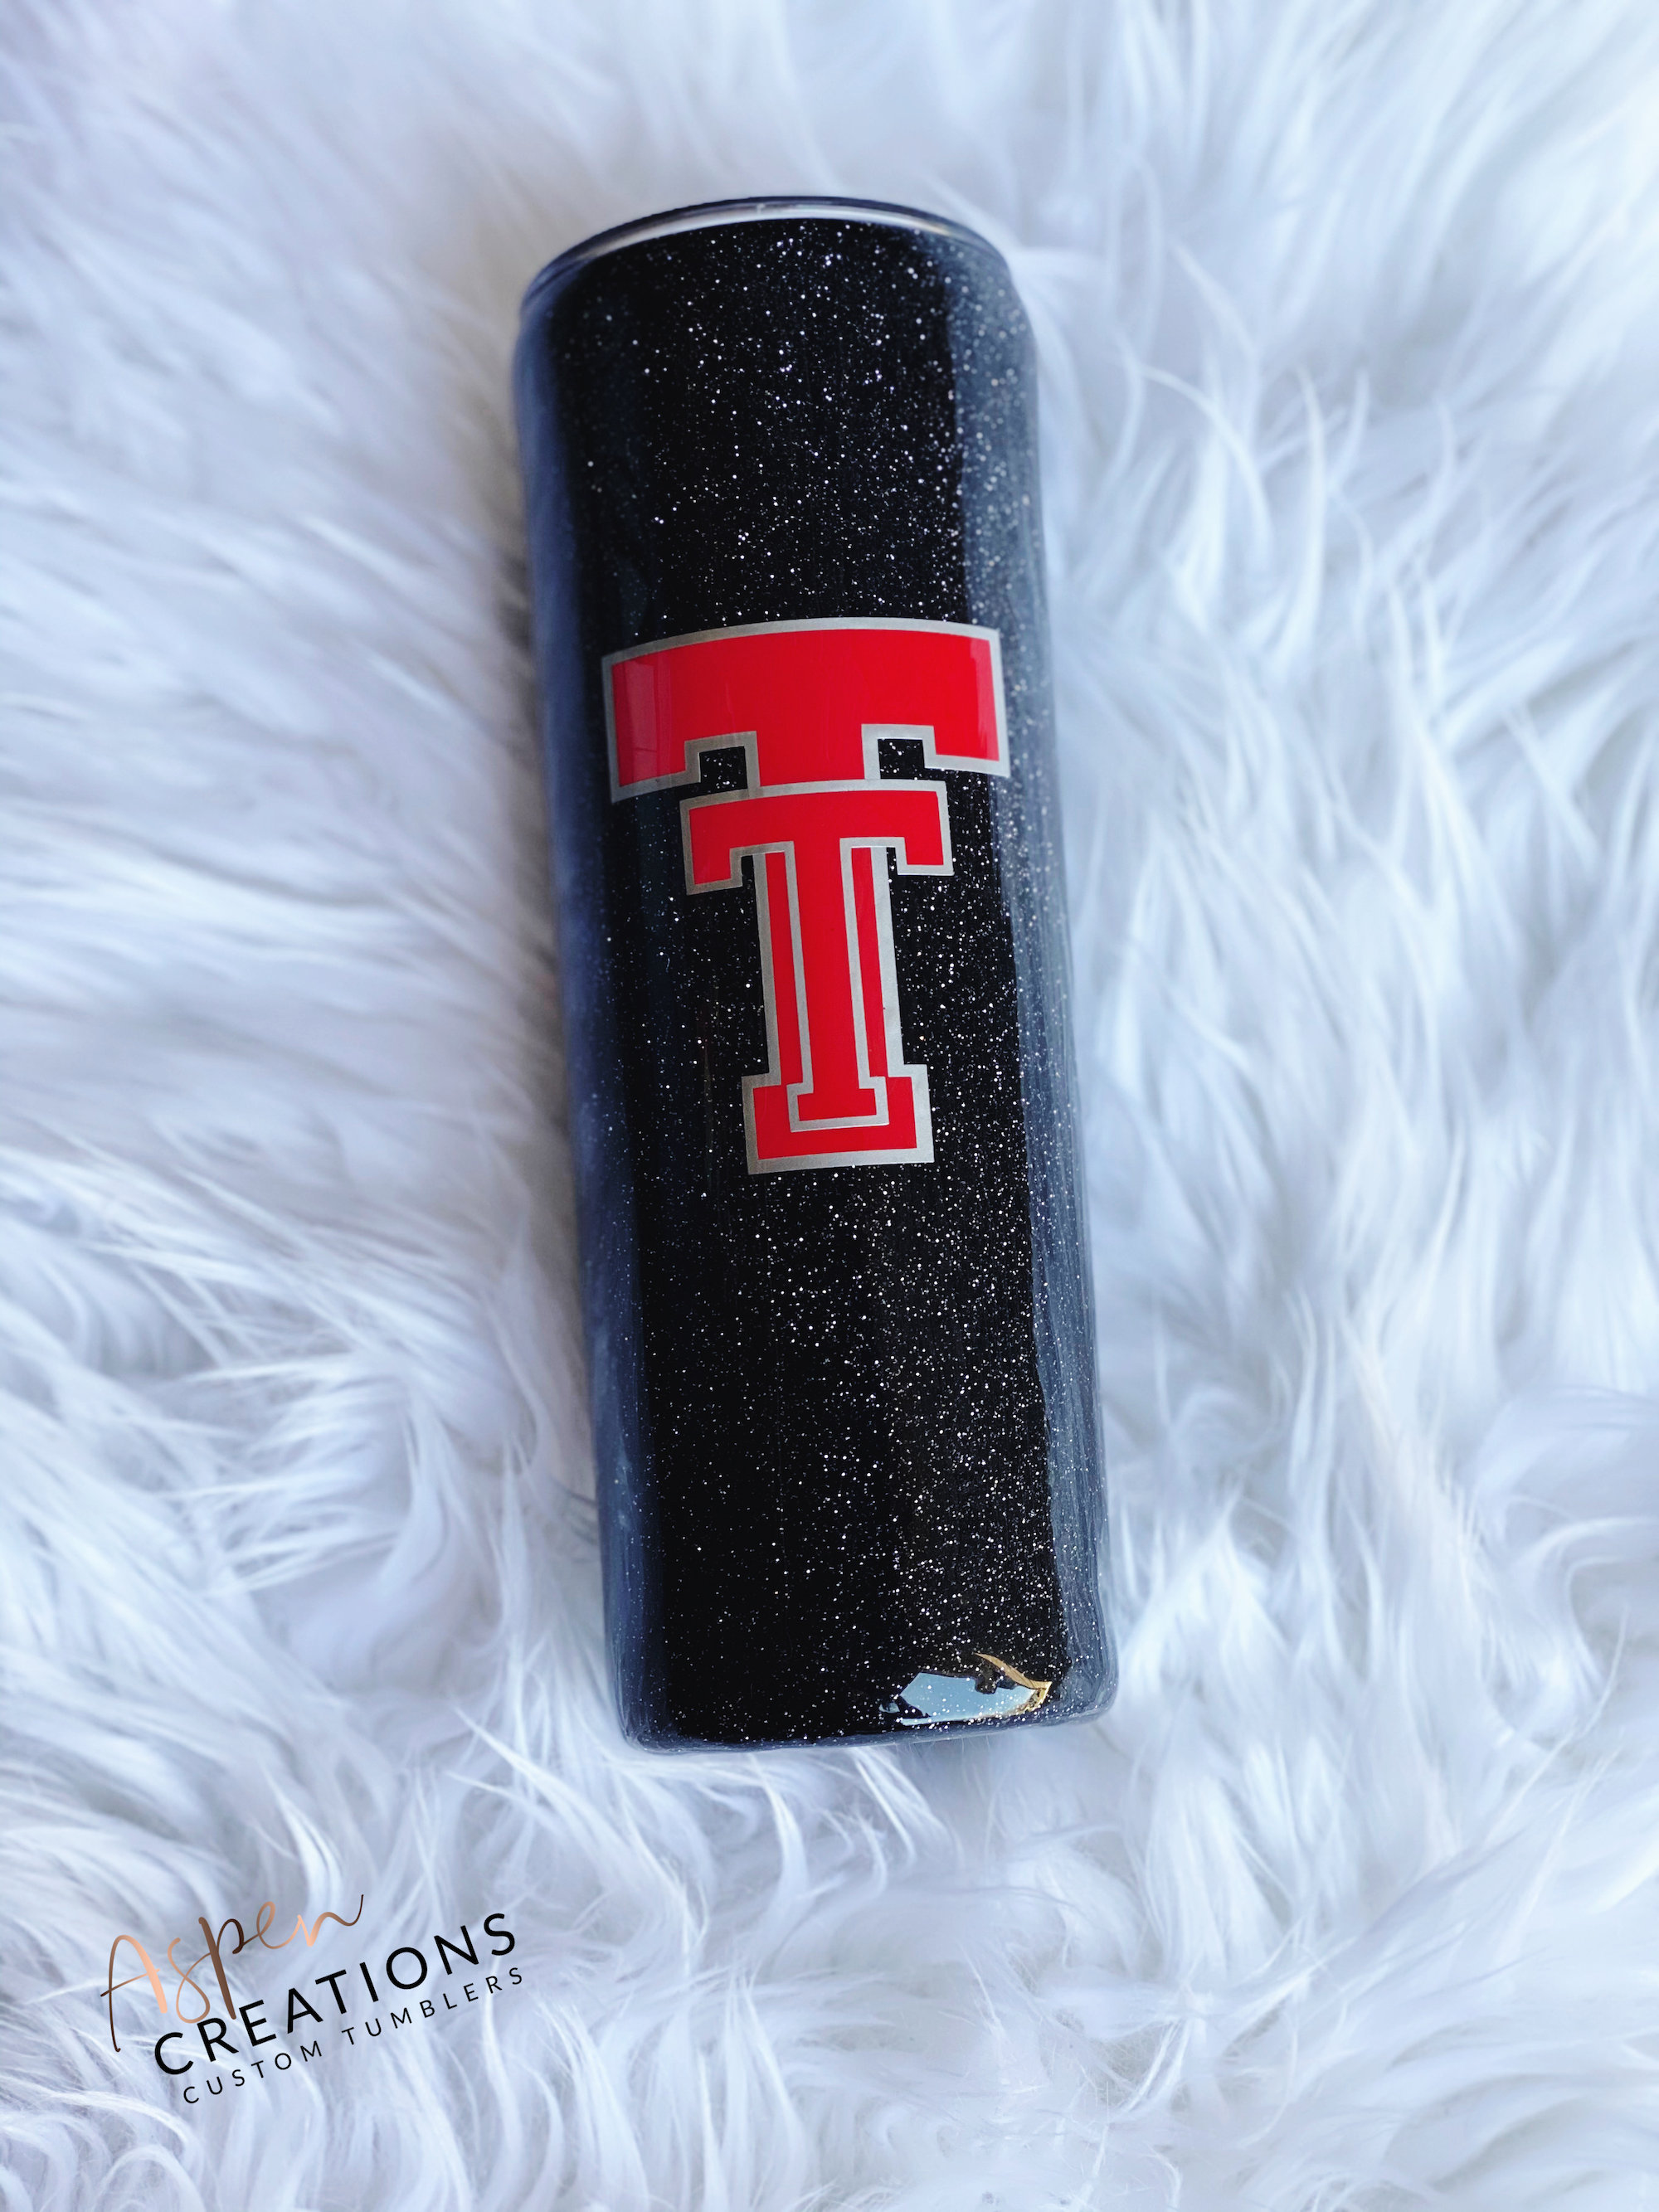 Texas Tech Travel Tumblers – Red Raider Outfitter